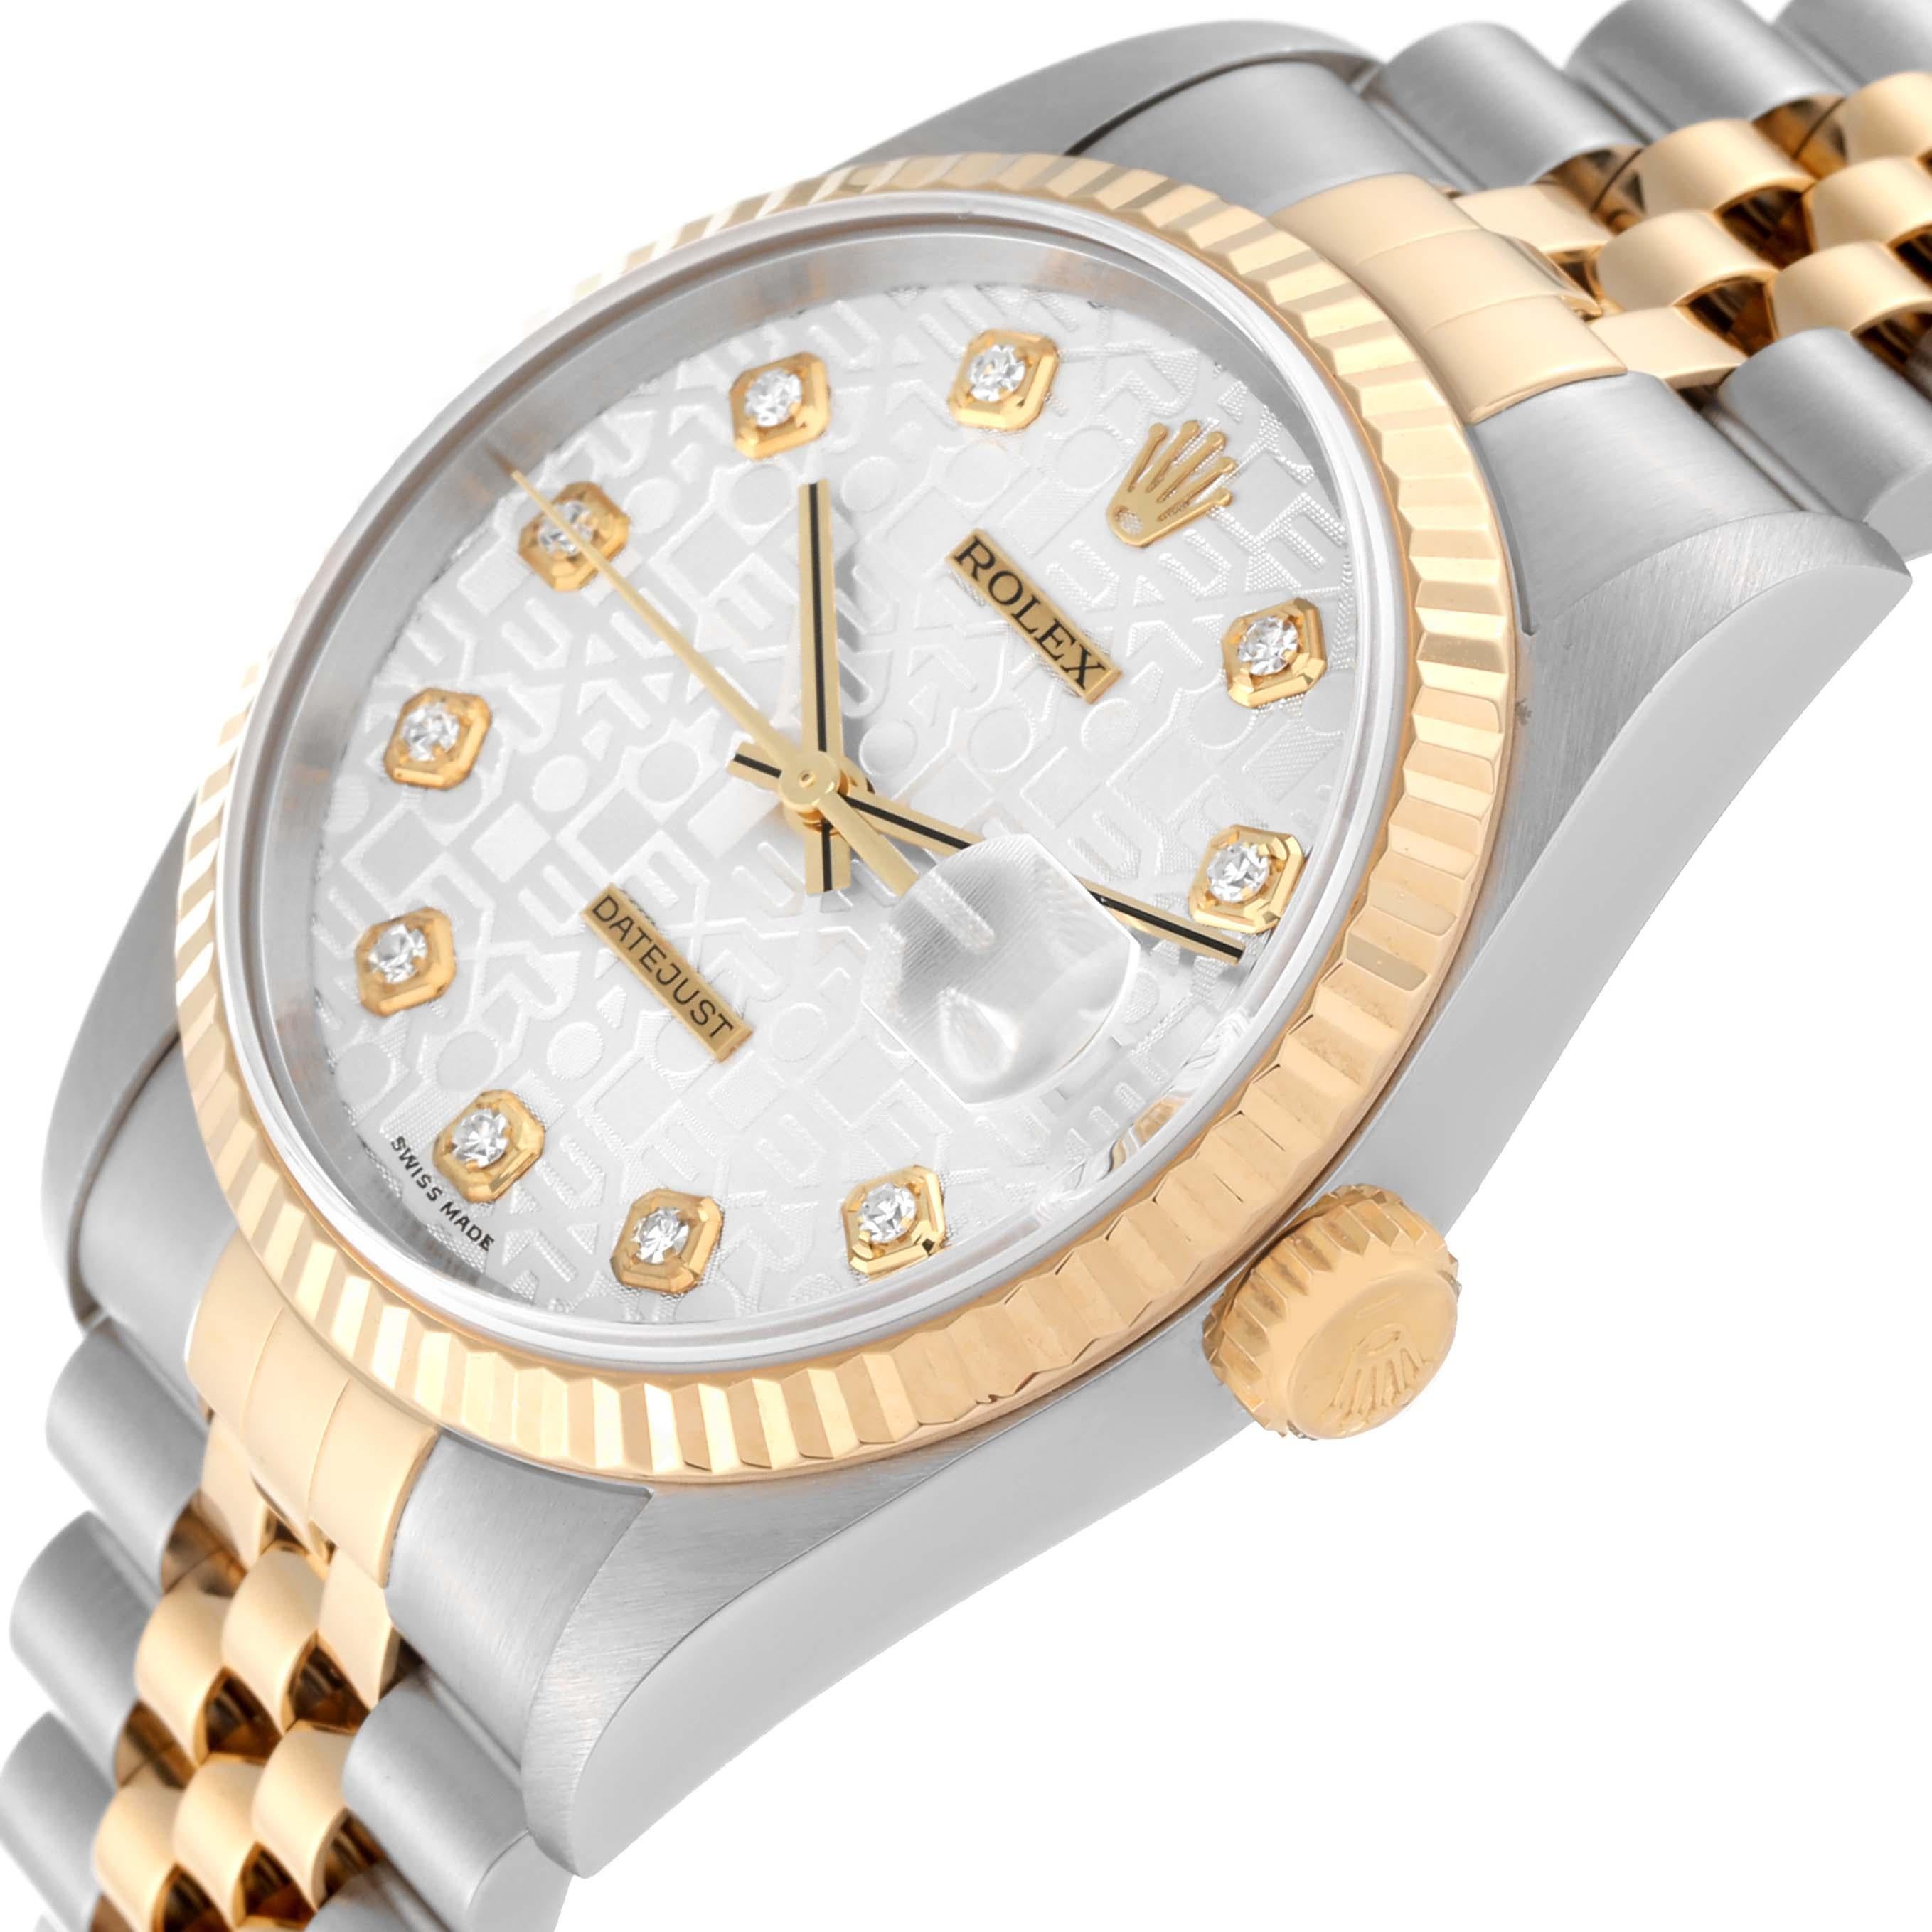 Rolex Datejust Anniversary Diamond Dial Steel Yellow Gold Mens Watch 16233 For Sale 3